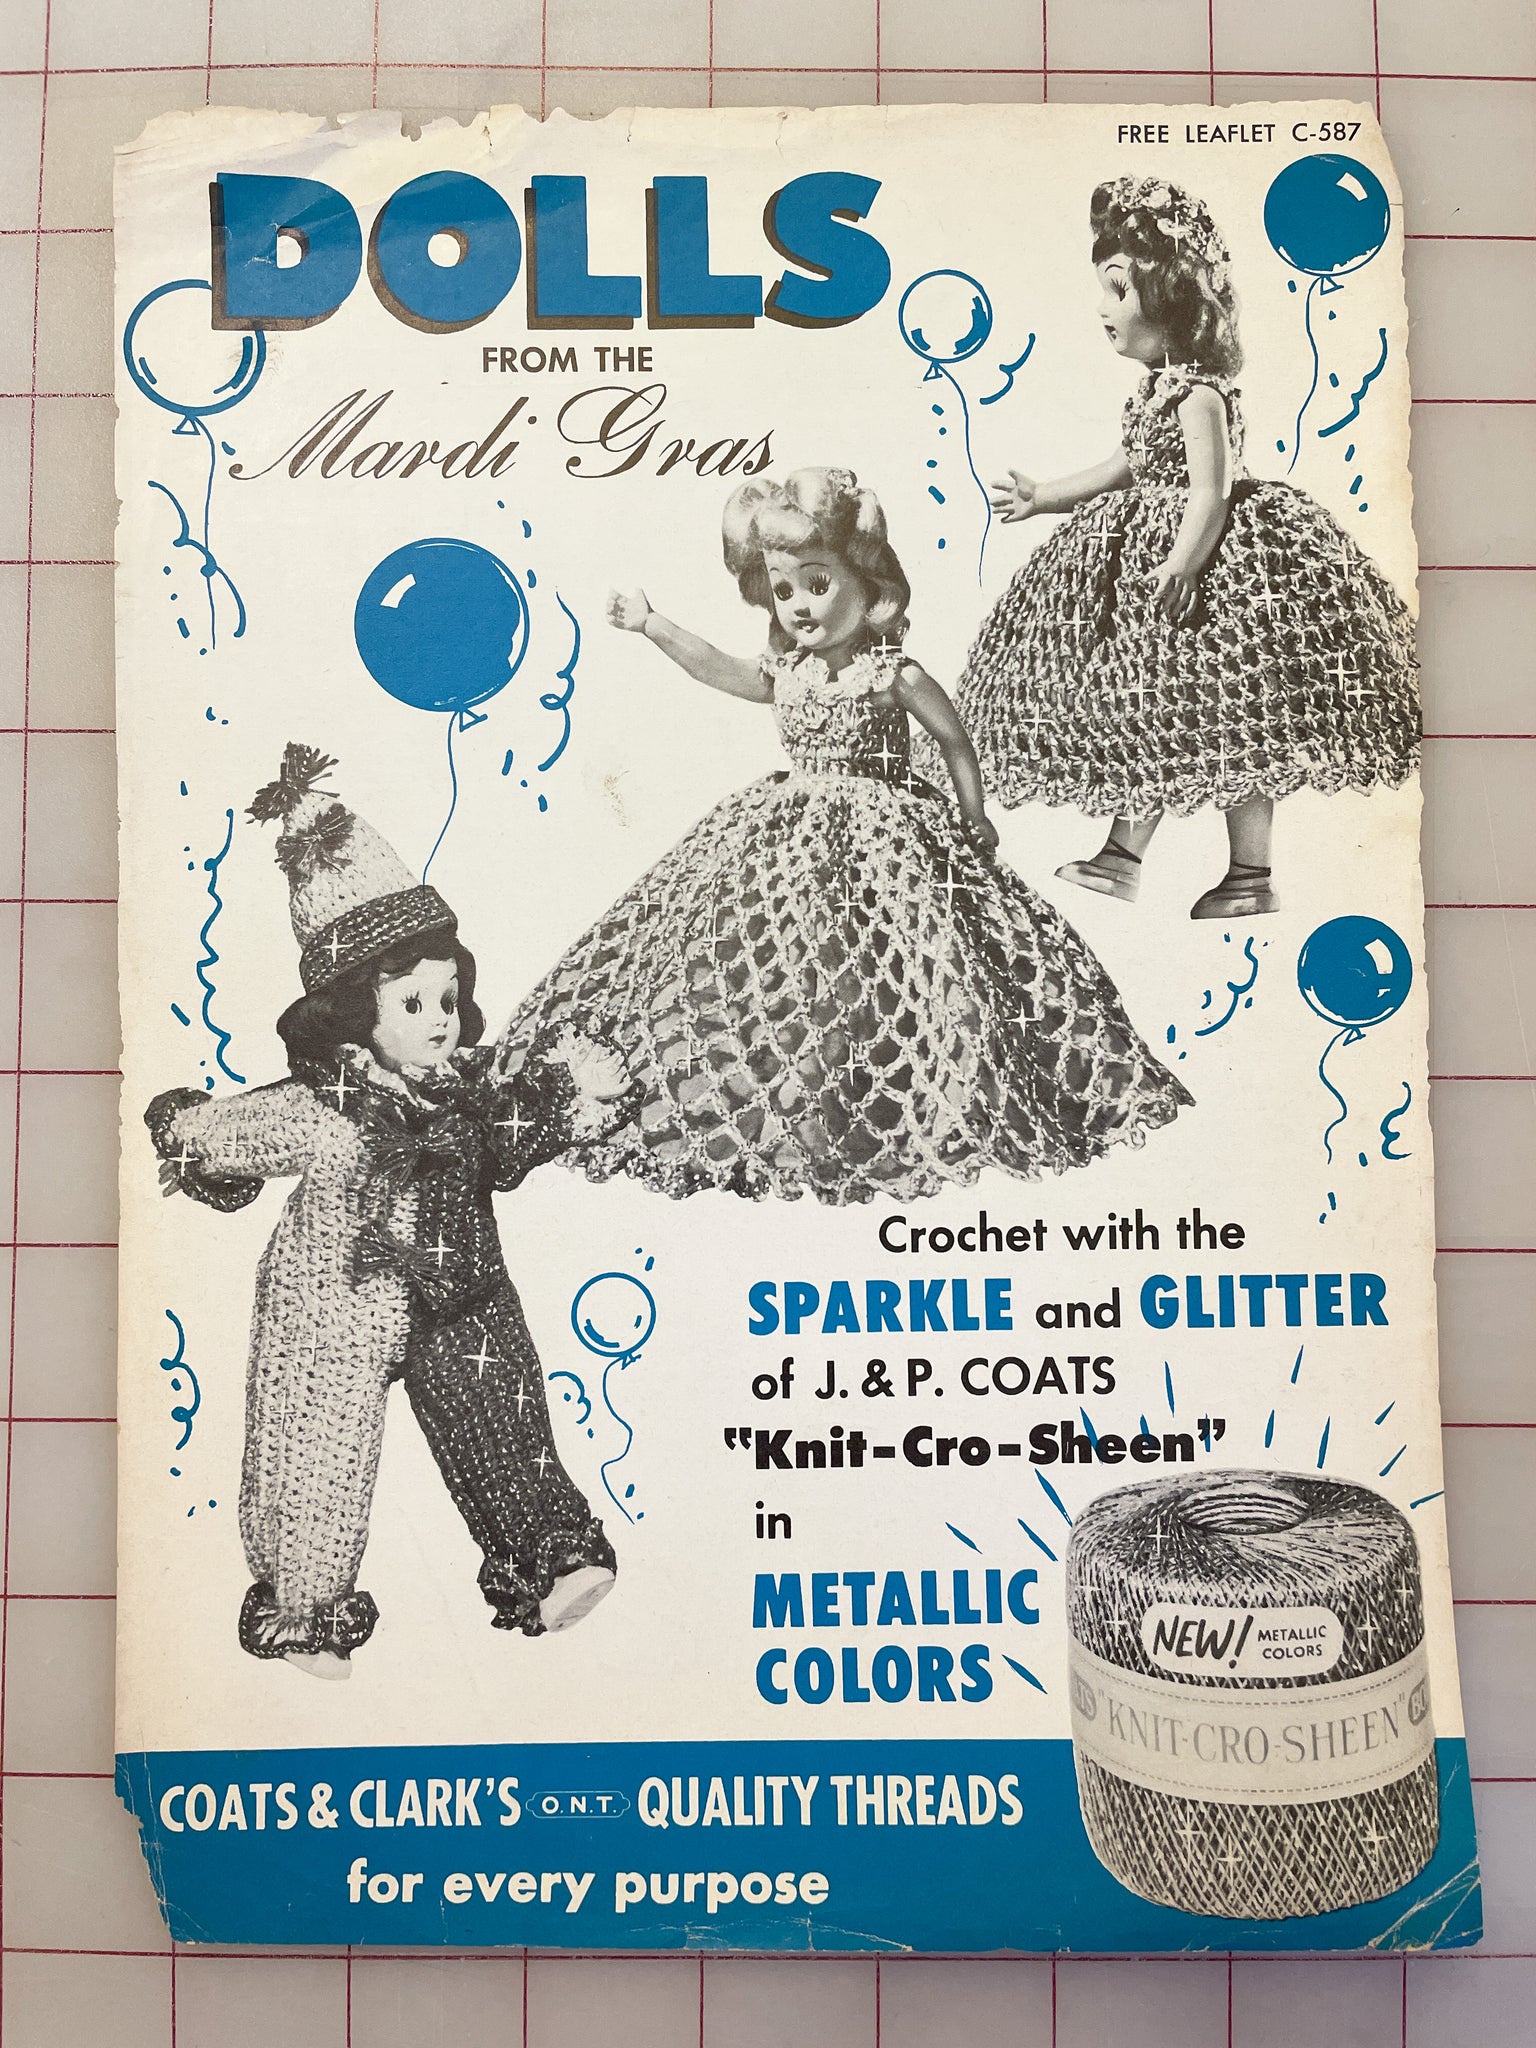 1954 Leaflet C-587 - Dolls From the Mardi Gras